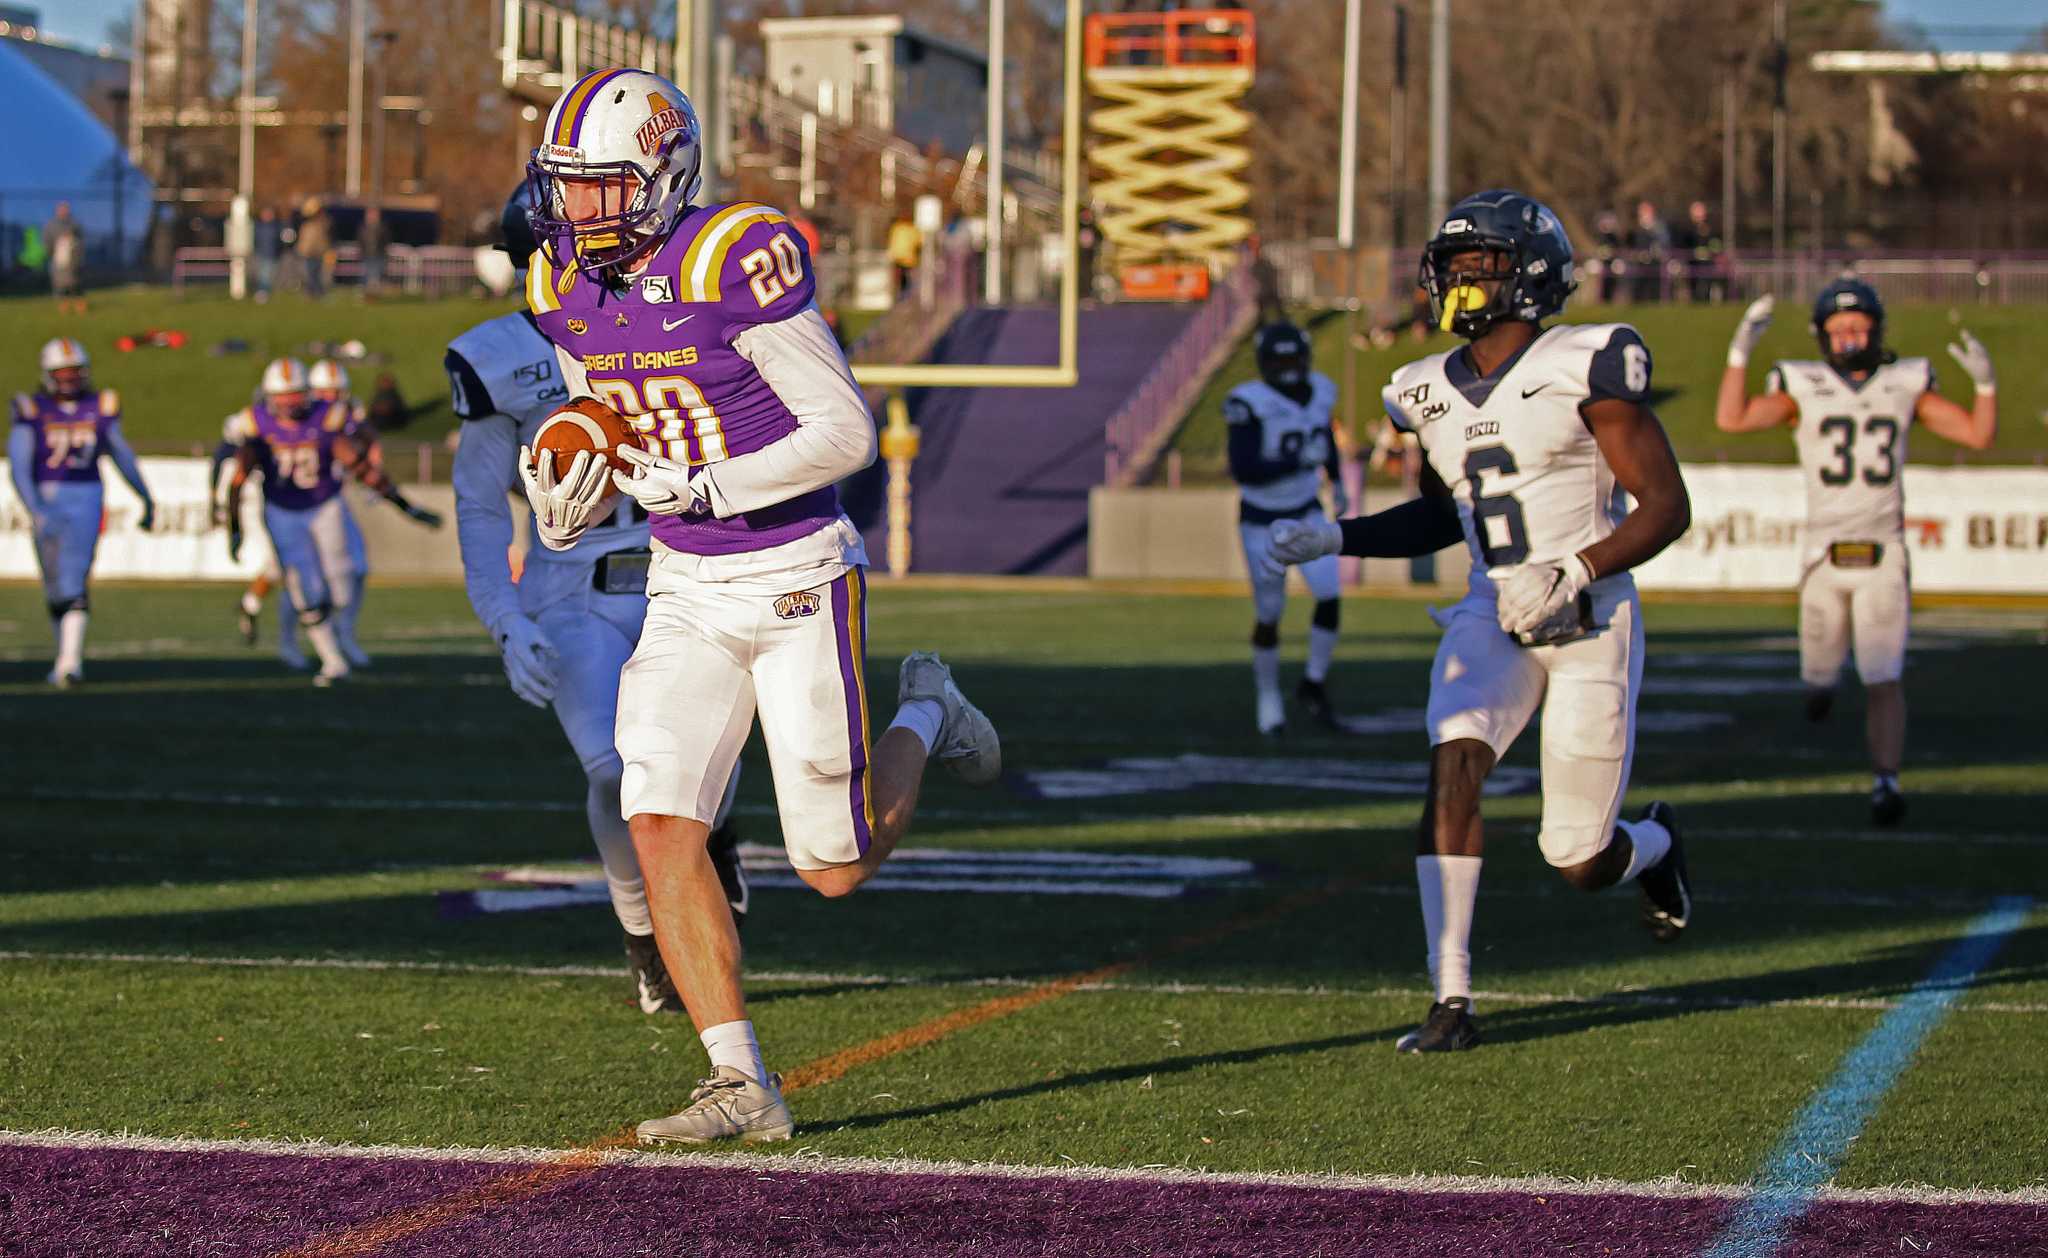 UAlbany football's fall 2021 schedule is revealed